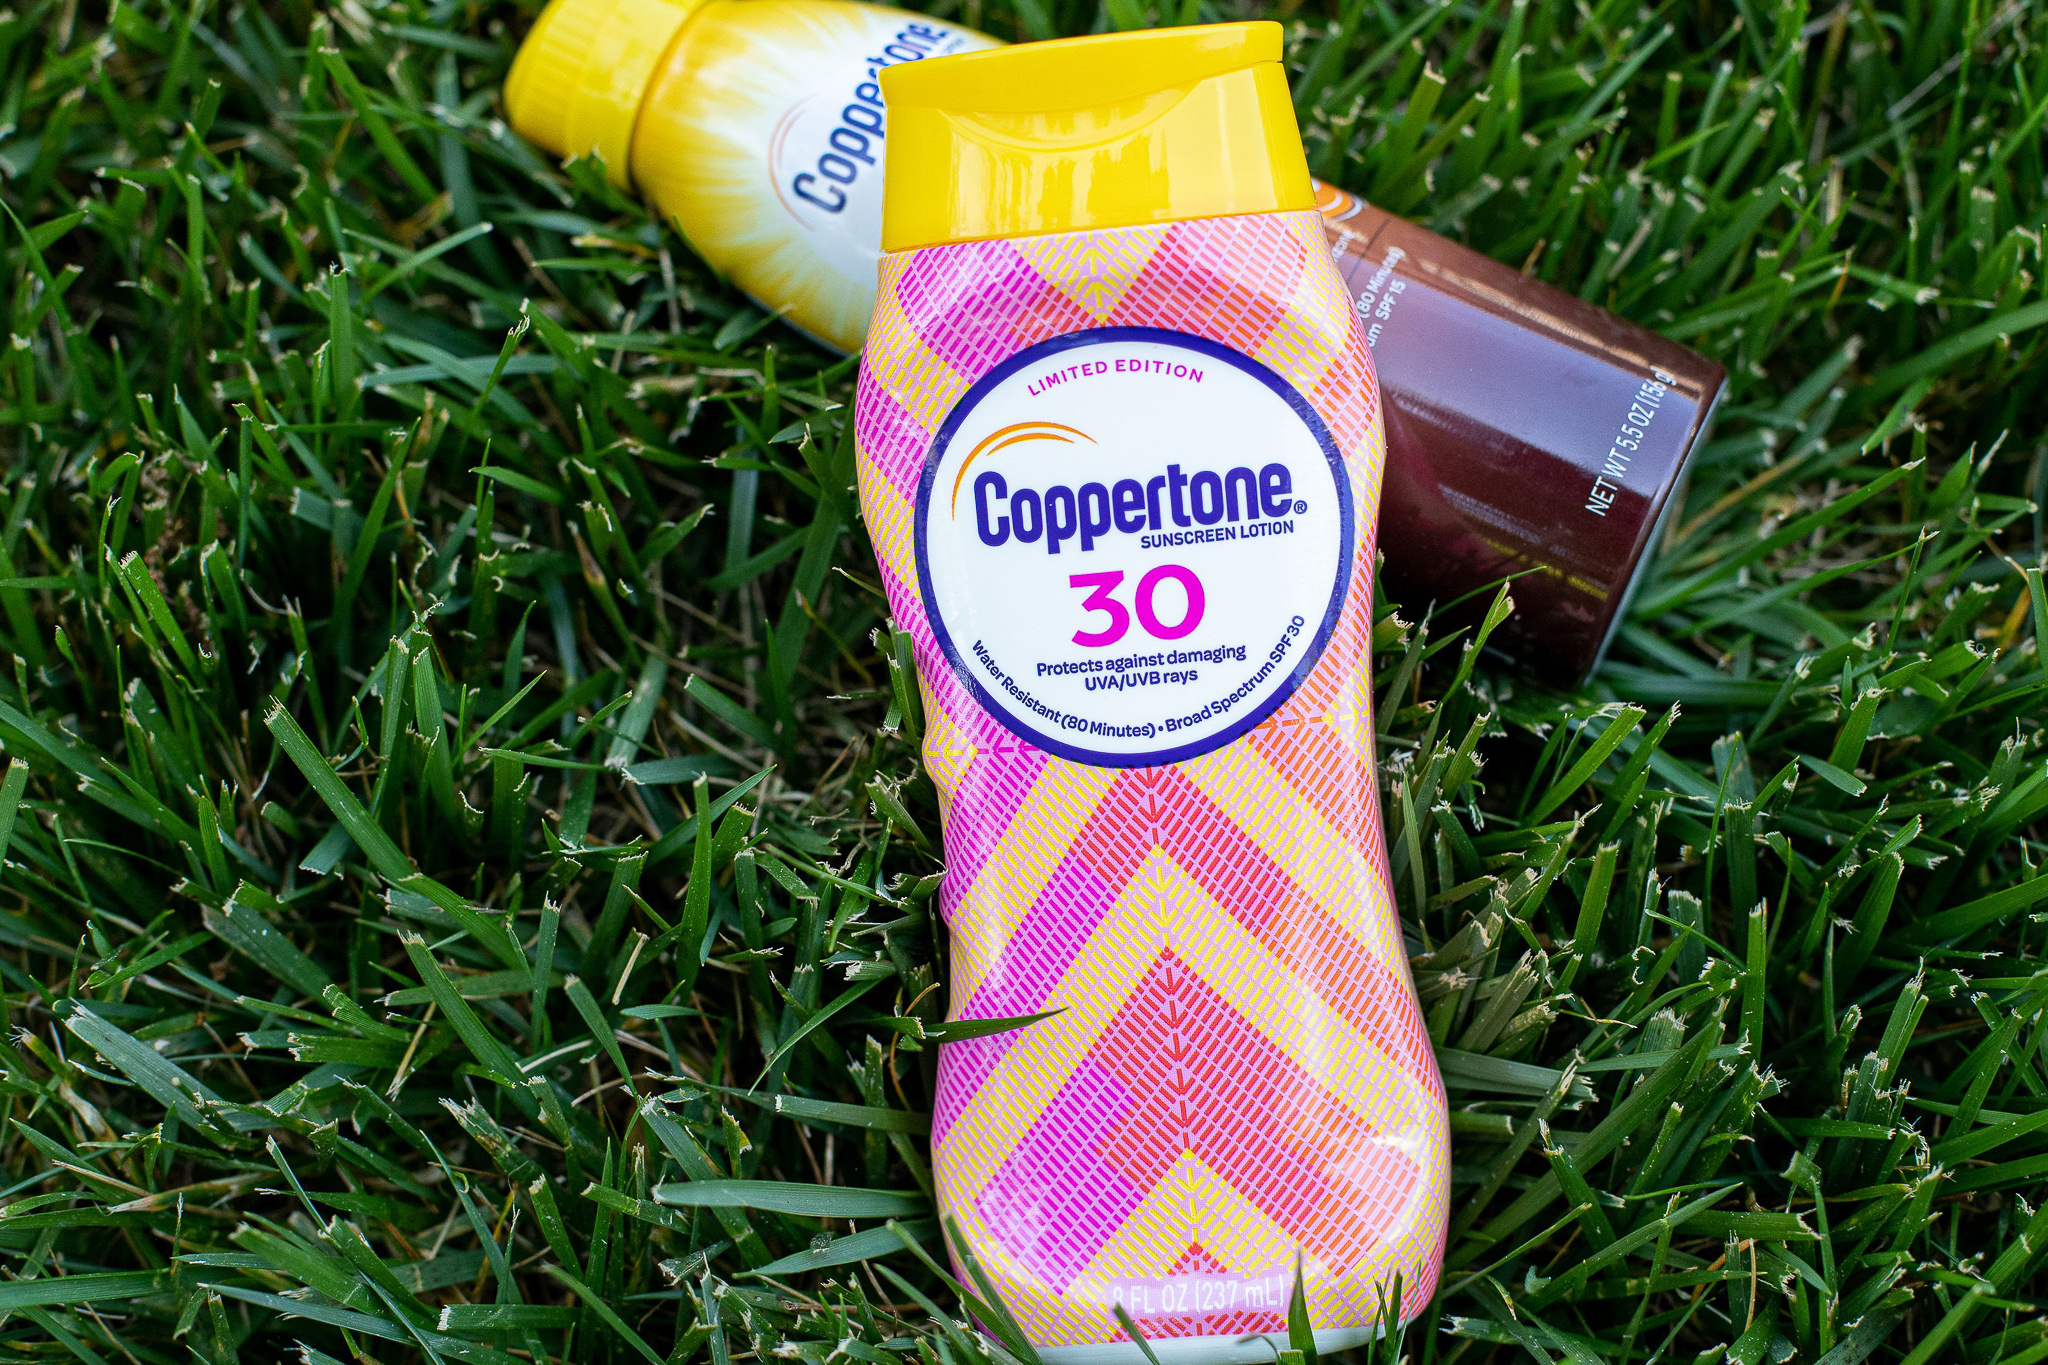 Save $5 On Coppertone Suncare Products At Publix